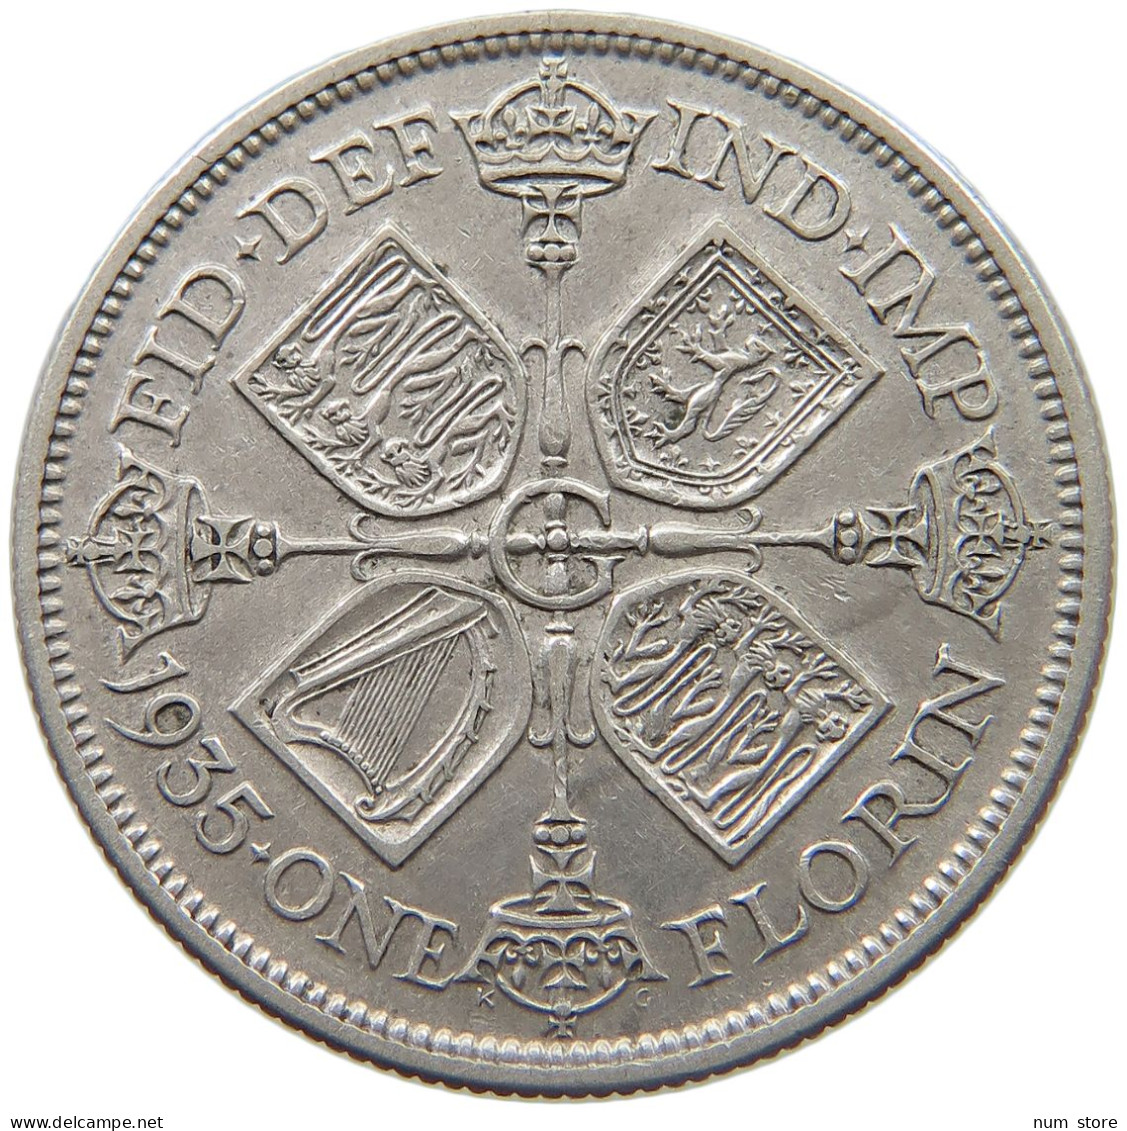 GREAT BRITAIN FLORIN 1935 GEORGE V. (1910-1936) #MA 023345 - J. 1 Florin / 2 Schillings